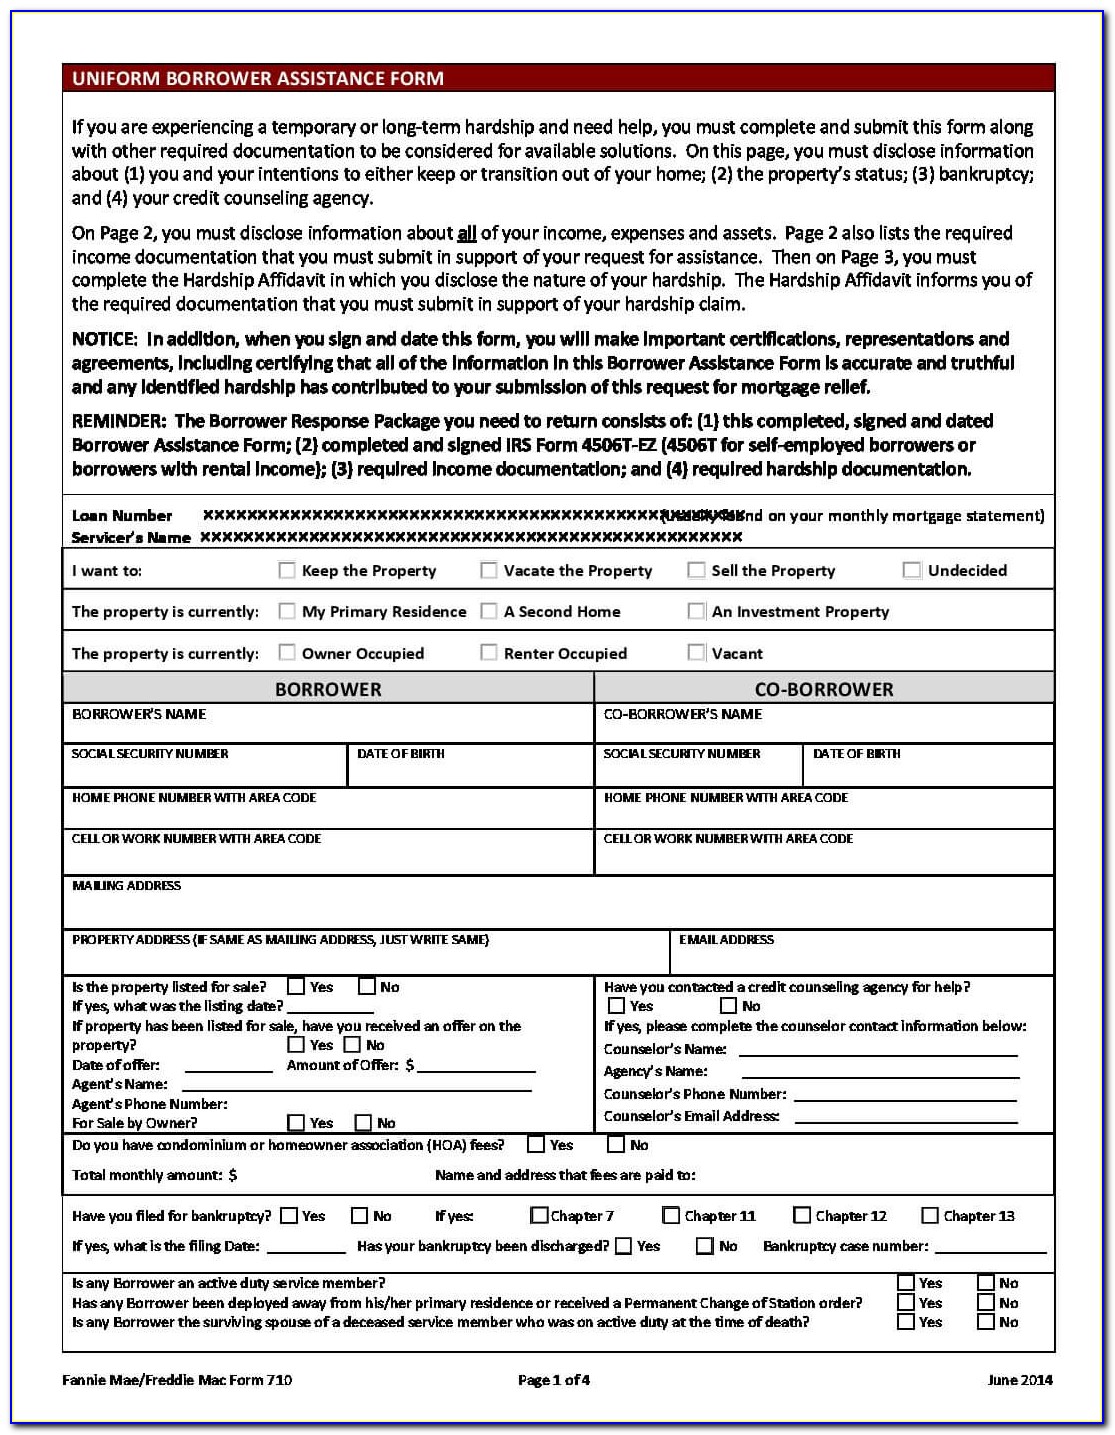 Loan Modification Form Filling Project